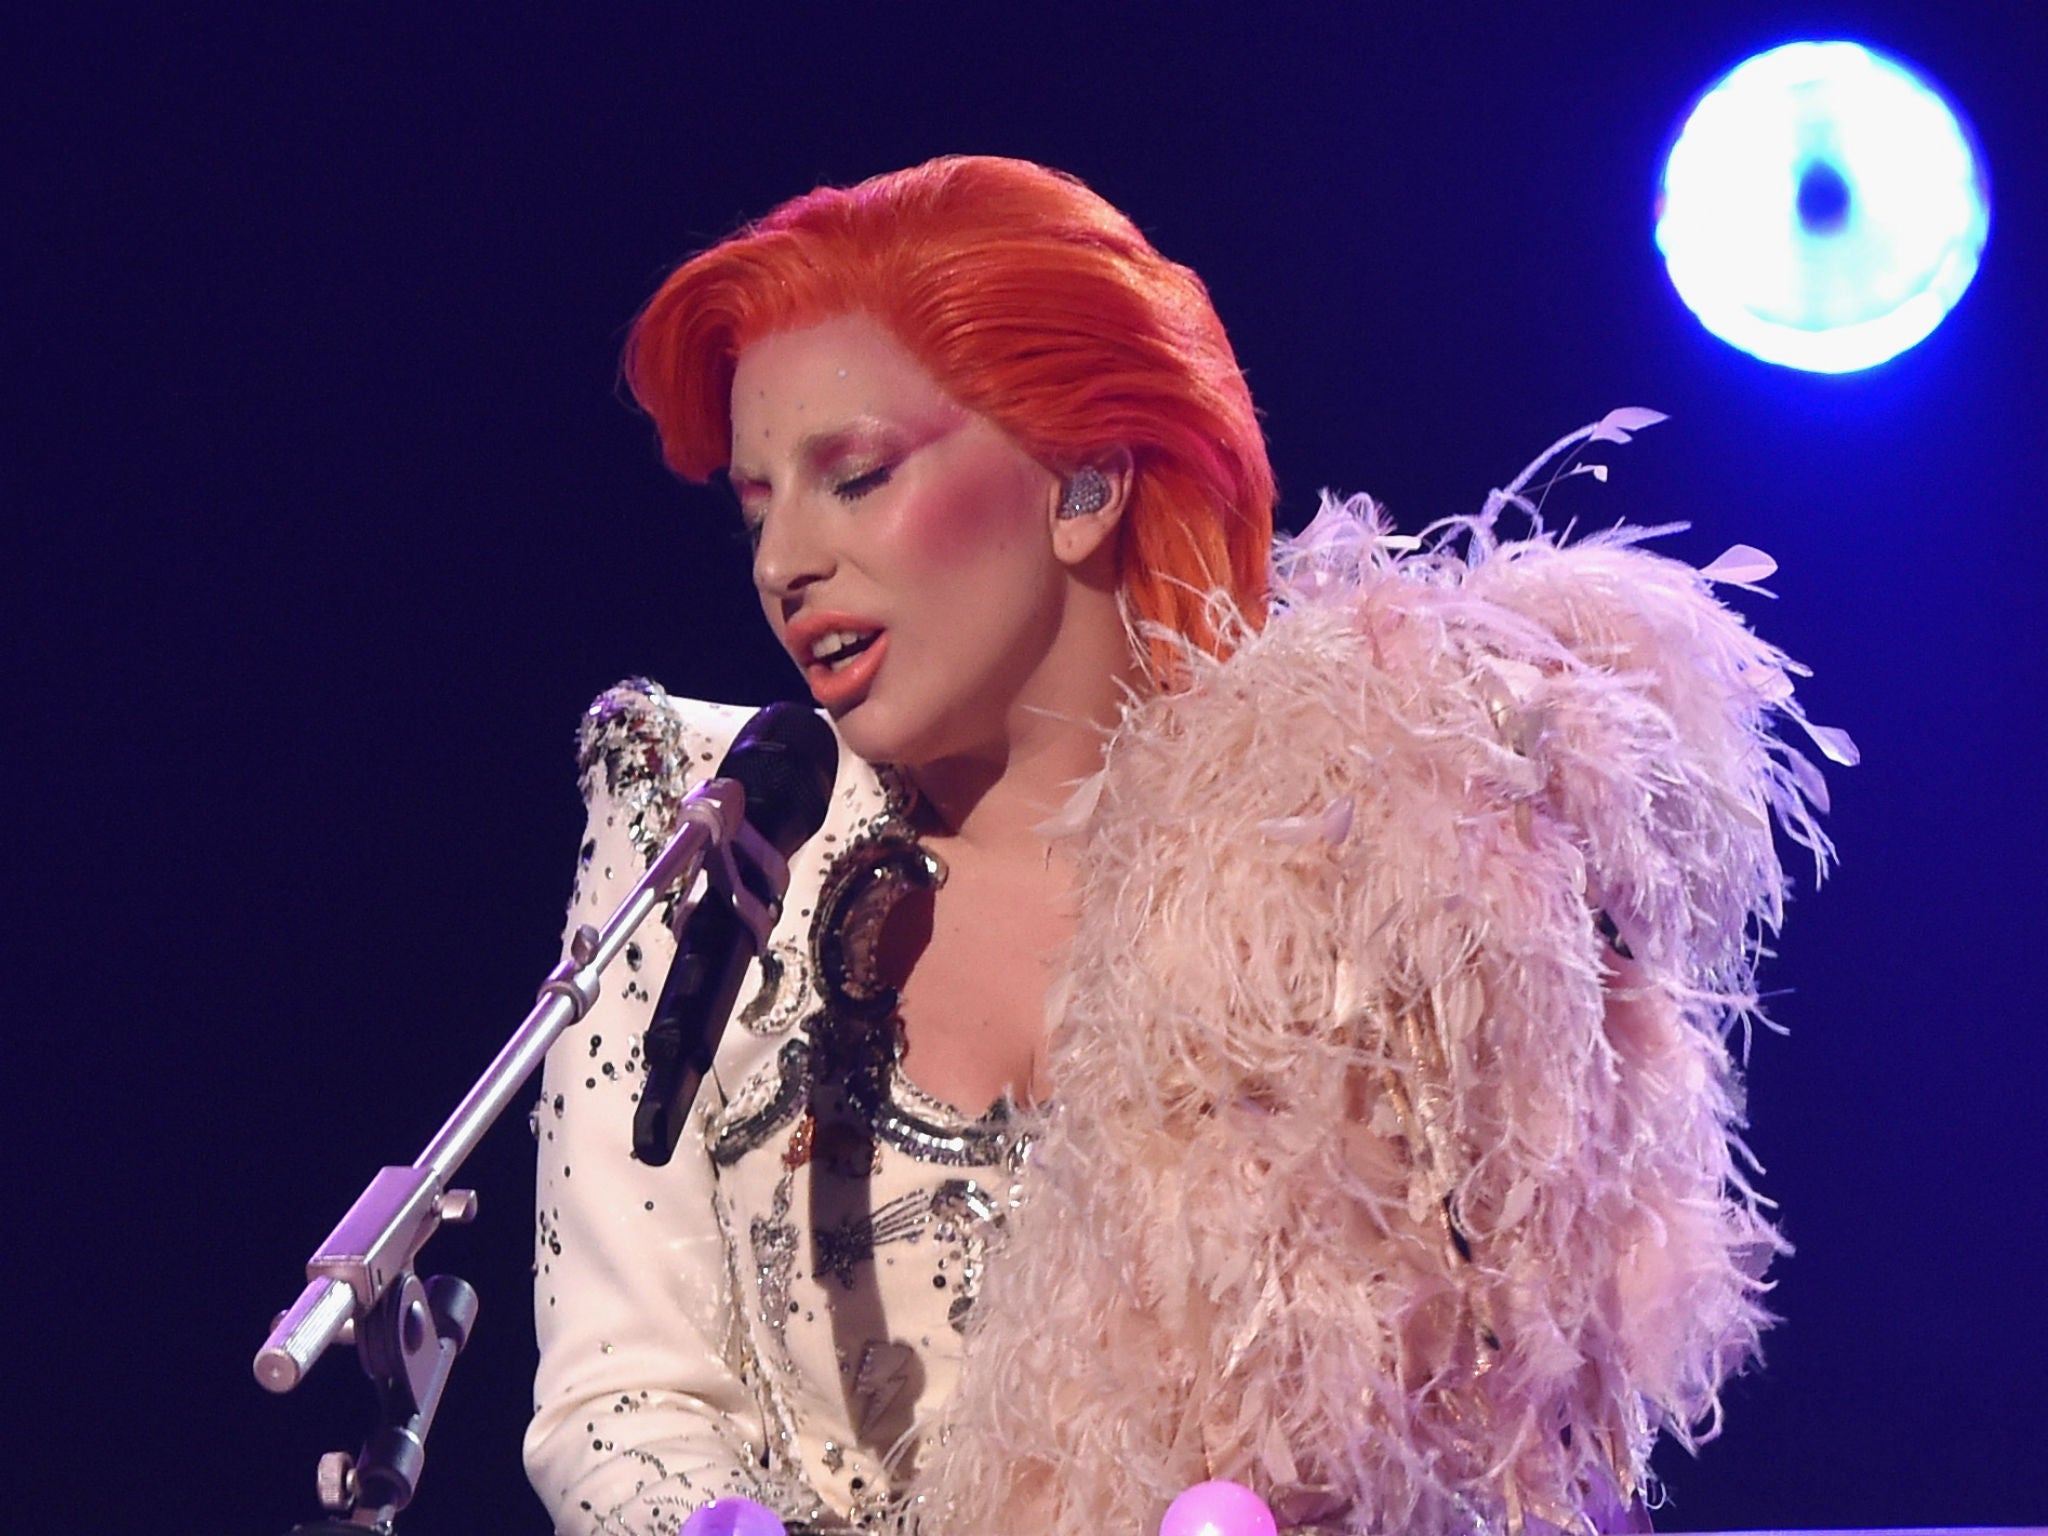 Lady Gaga performs her David Bowie tribute at the Grammys